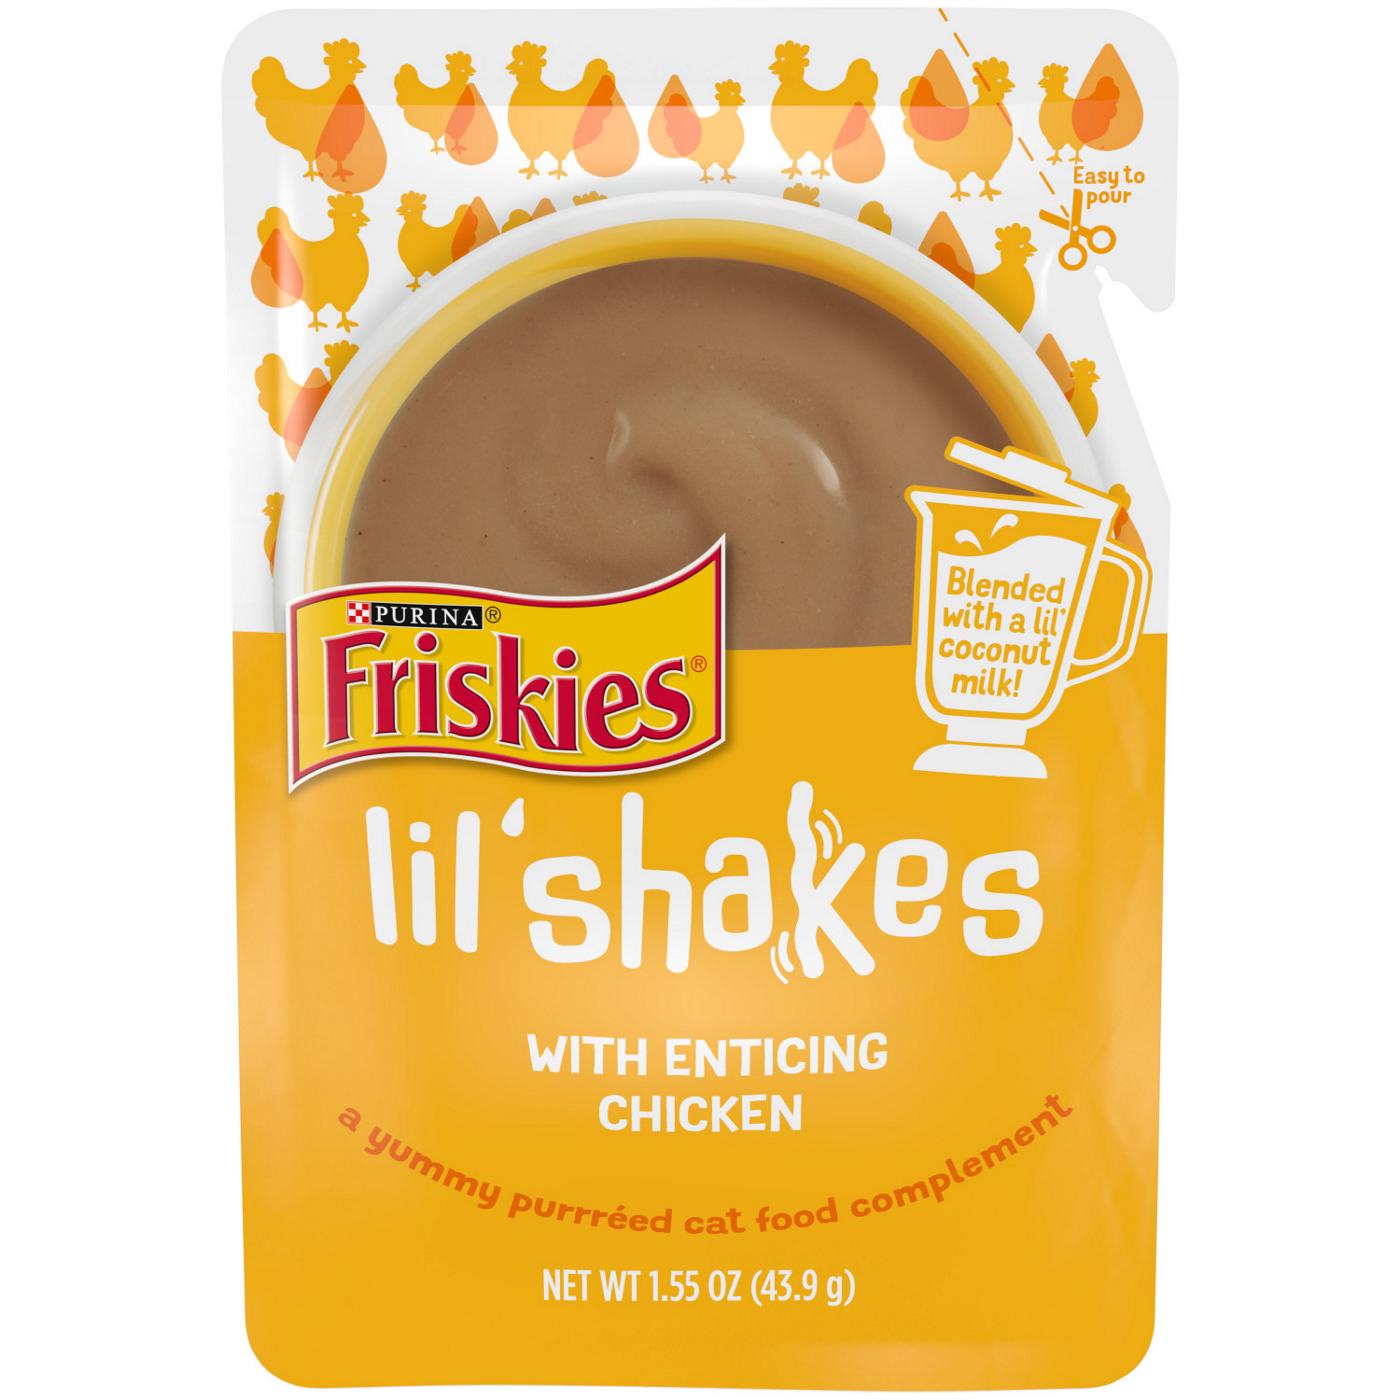 Friskies Purina Friskies Pureed Cat Food Topper, Lil’ Shakes With Enticing Chicken Lickable Cat Treats; image 1 of 8